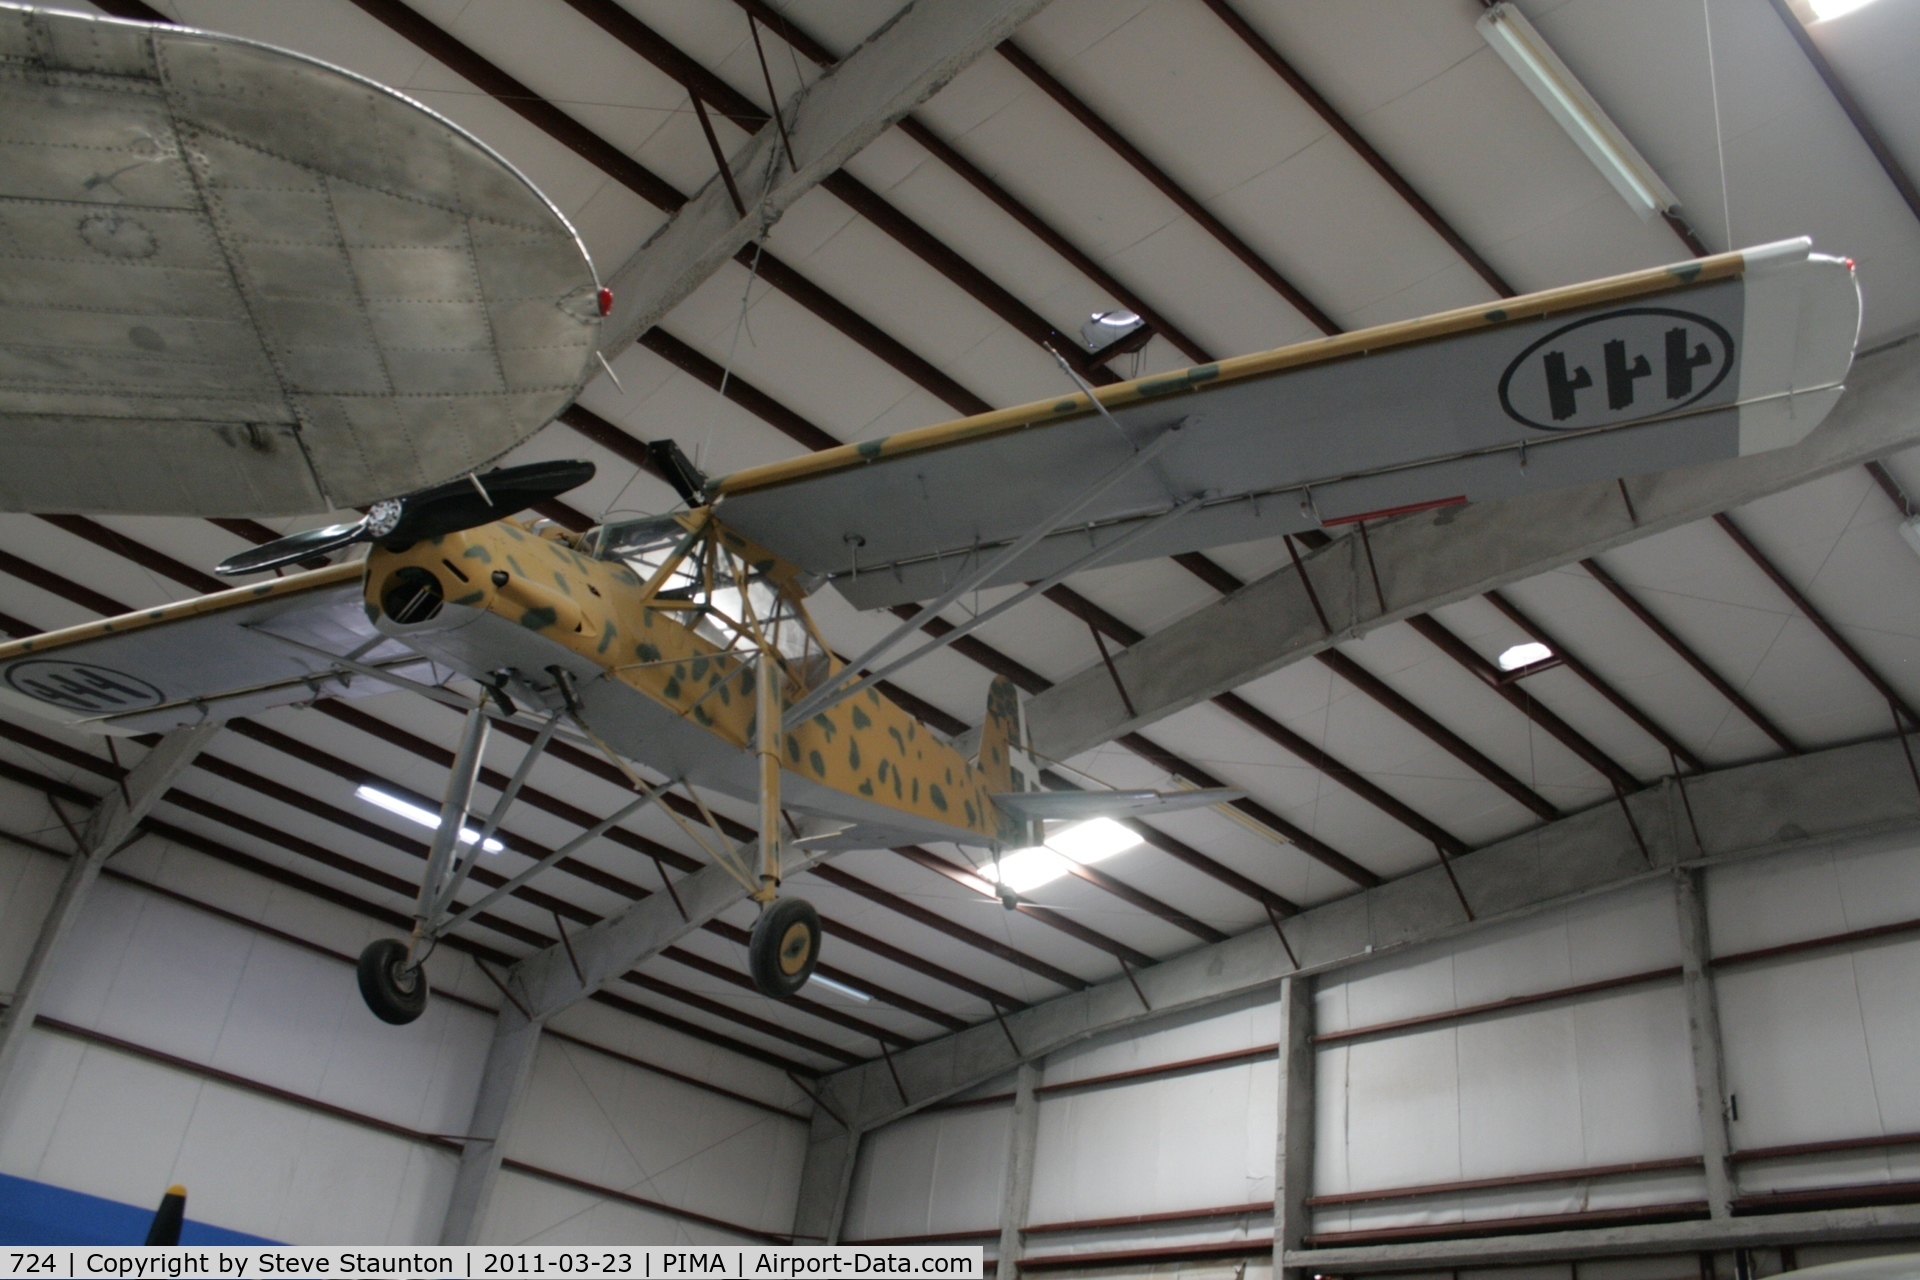 724, Morane-Saulnier MS-500 Criquet C/N 724, Taken at Pima Air and Space Museum, in March 2011 whilst on an Aeroprint Aviation tour